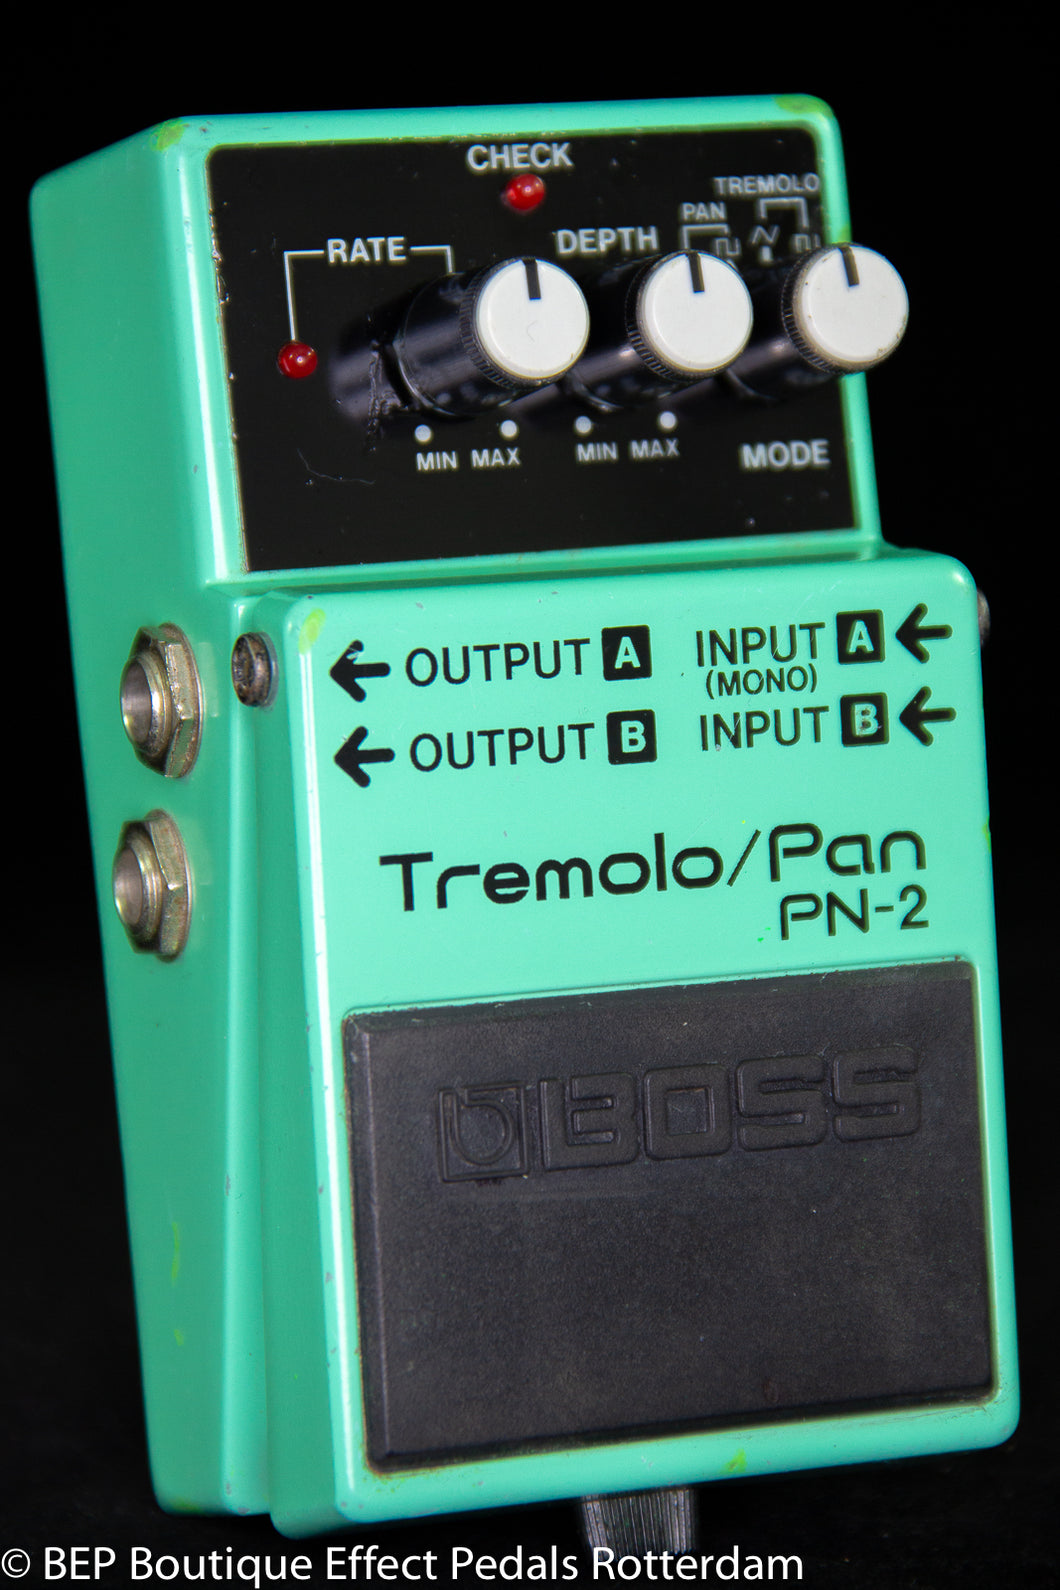 Boss PN-2 Tremolo/Pan 1990 s/n ZB65496, as used by Andy Bell